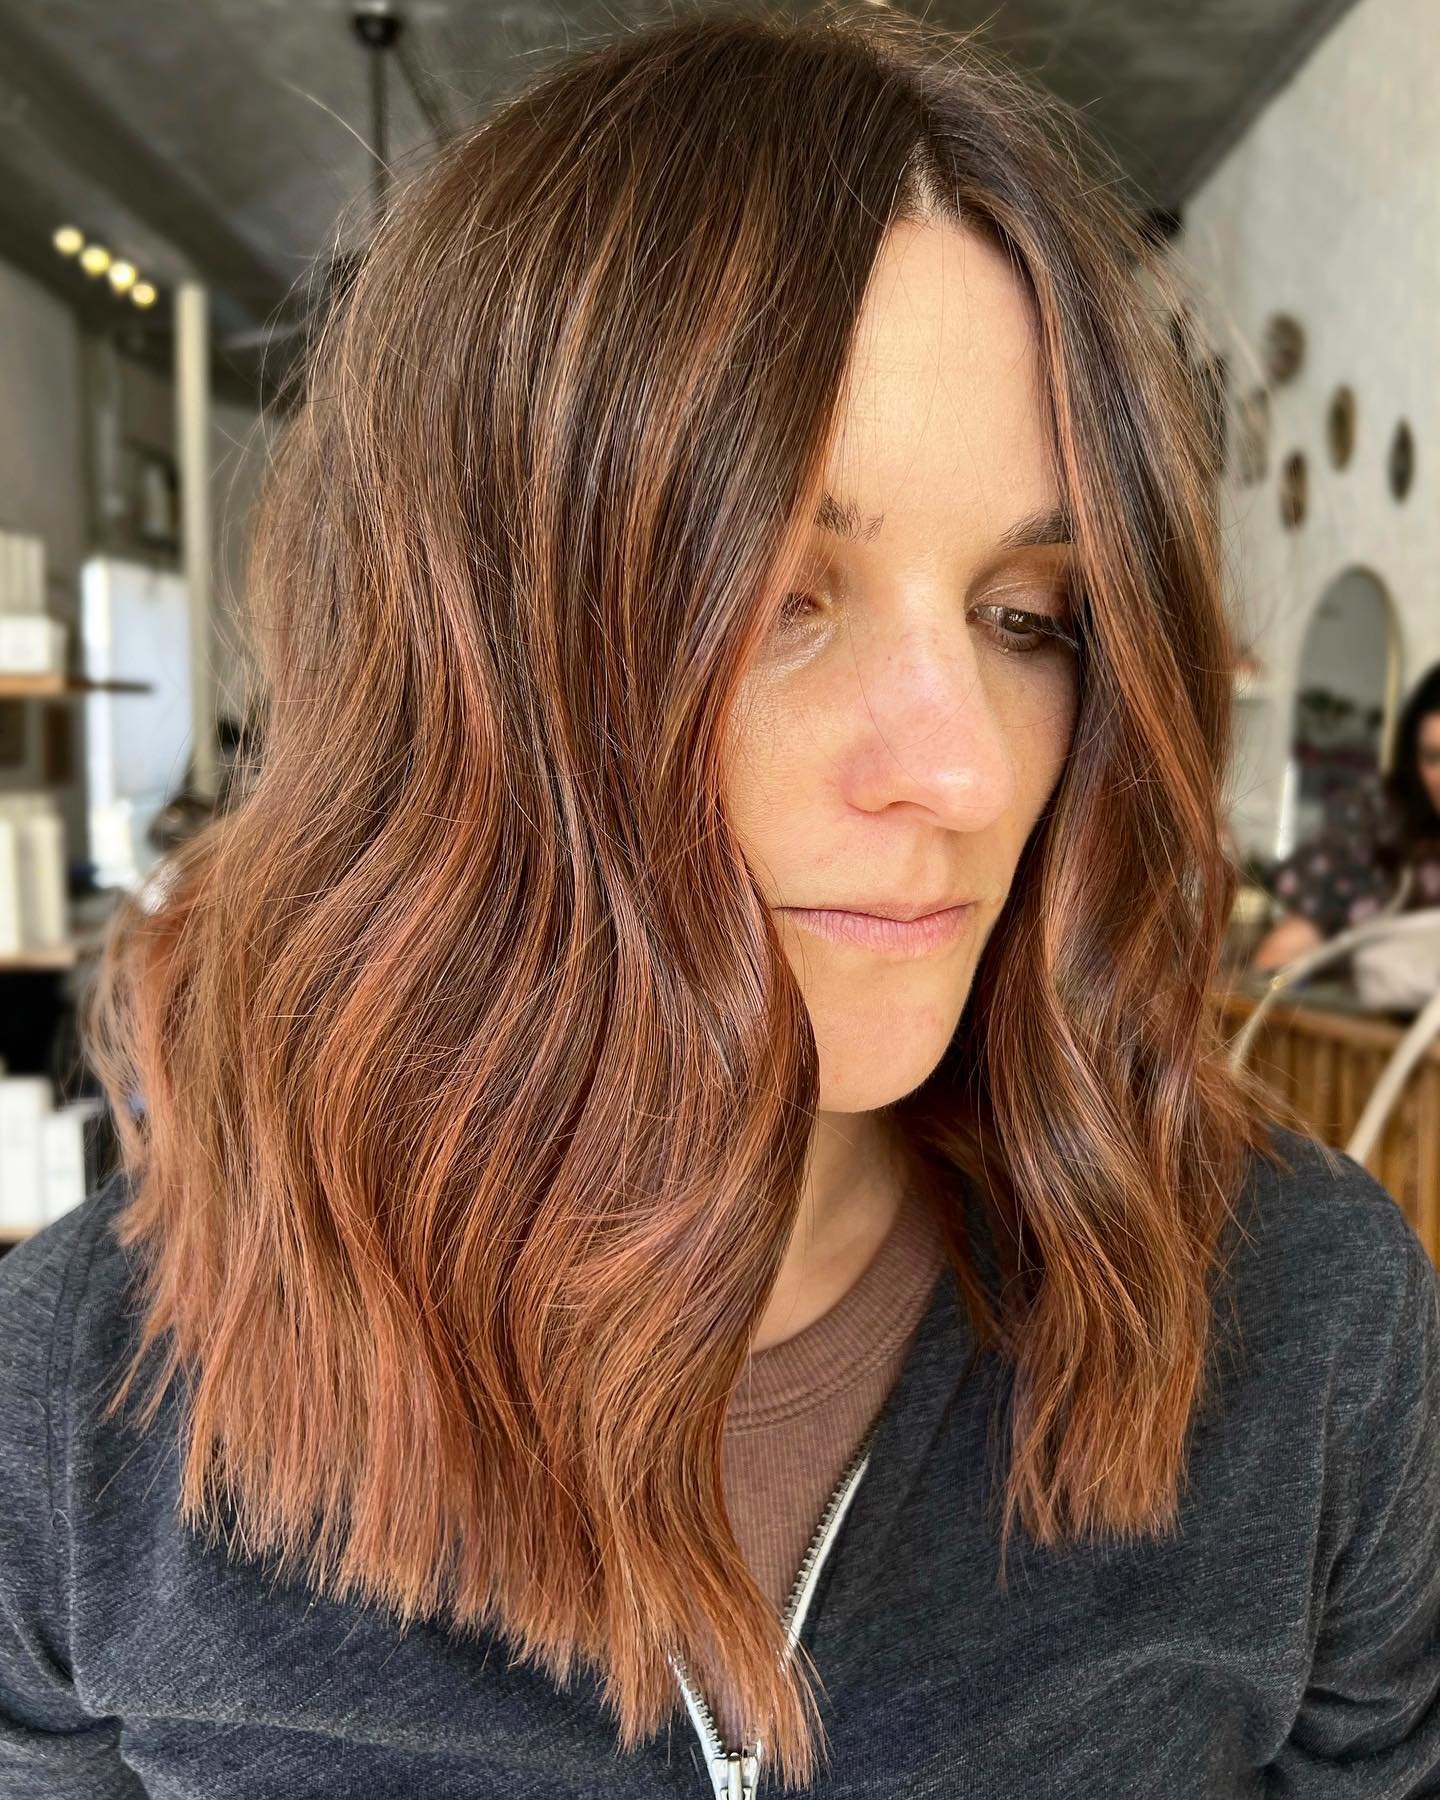 Copper and naturals are having their moment this year and we are here for it, loving this chocolate copper balayage 🙌
&bull; hair by Sydney @stotka_styles &bull;
.
.
.
#chocolatecopperhair #behindthechair #copperhair #cowboycopper #rvasalon #rvahair